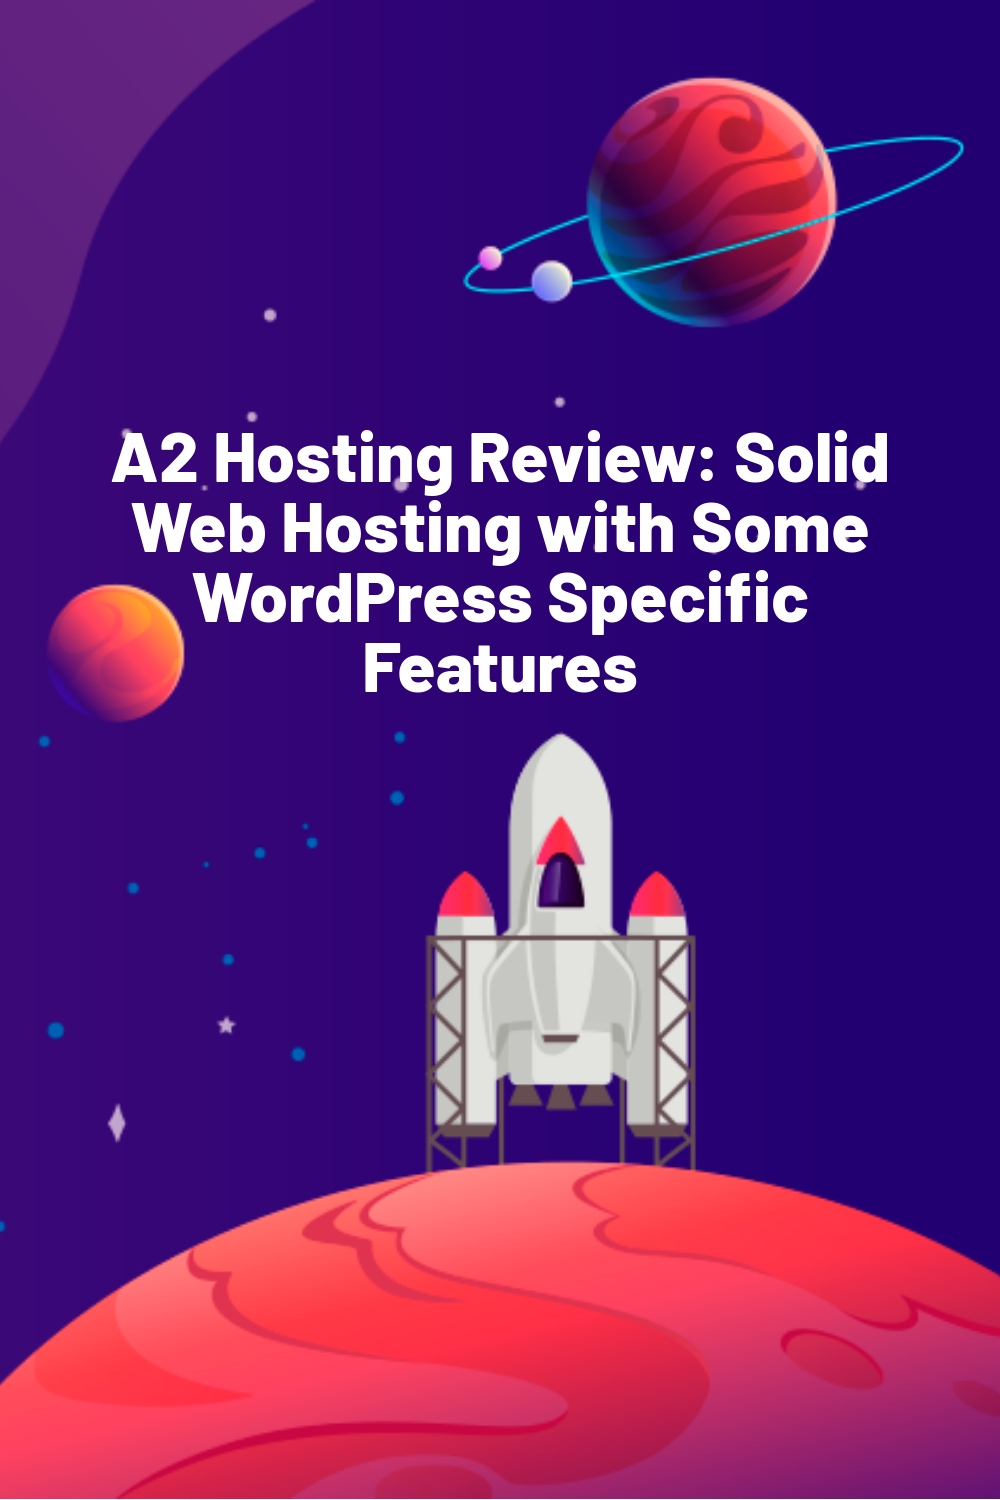 A2 Hosting Review: Solid Web Hosting with Some WordPress Specific Features